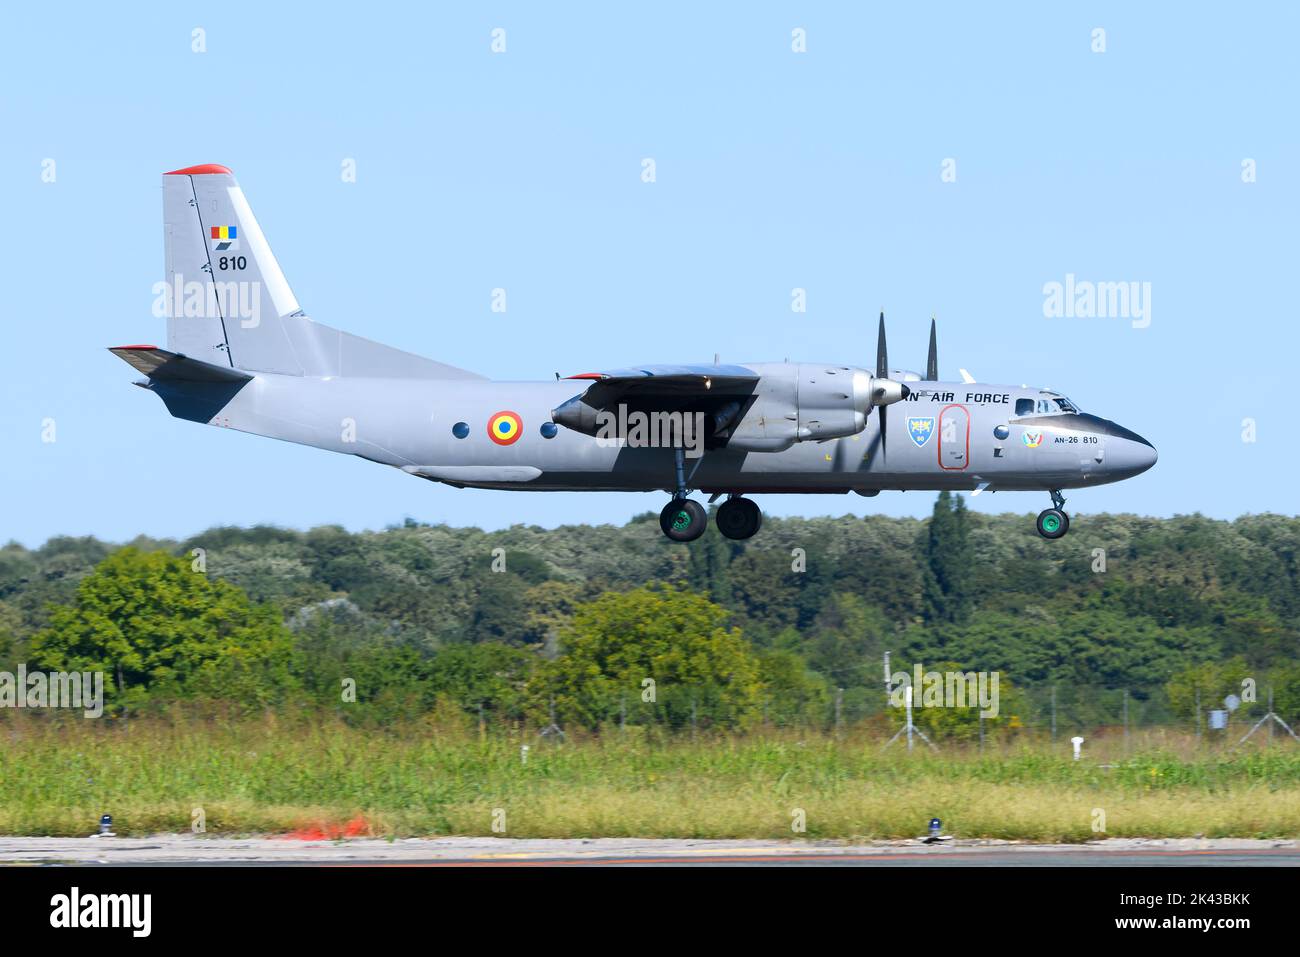 Romania - Air Force Antonov An-26 at Bucharest Airport. Military aircraft of Romanian Air Force An26, plane also know as Antonov 26. Stock Photo